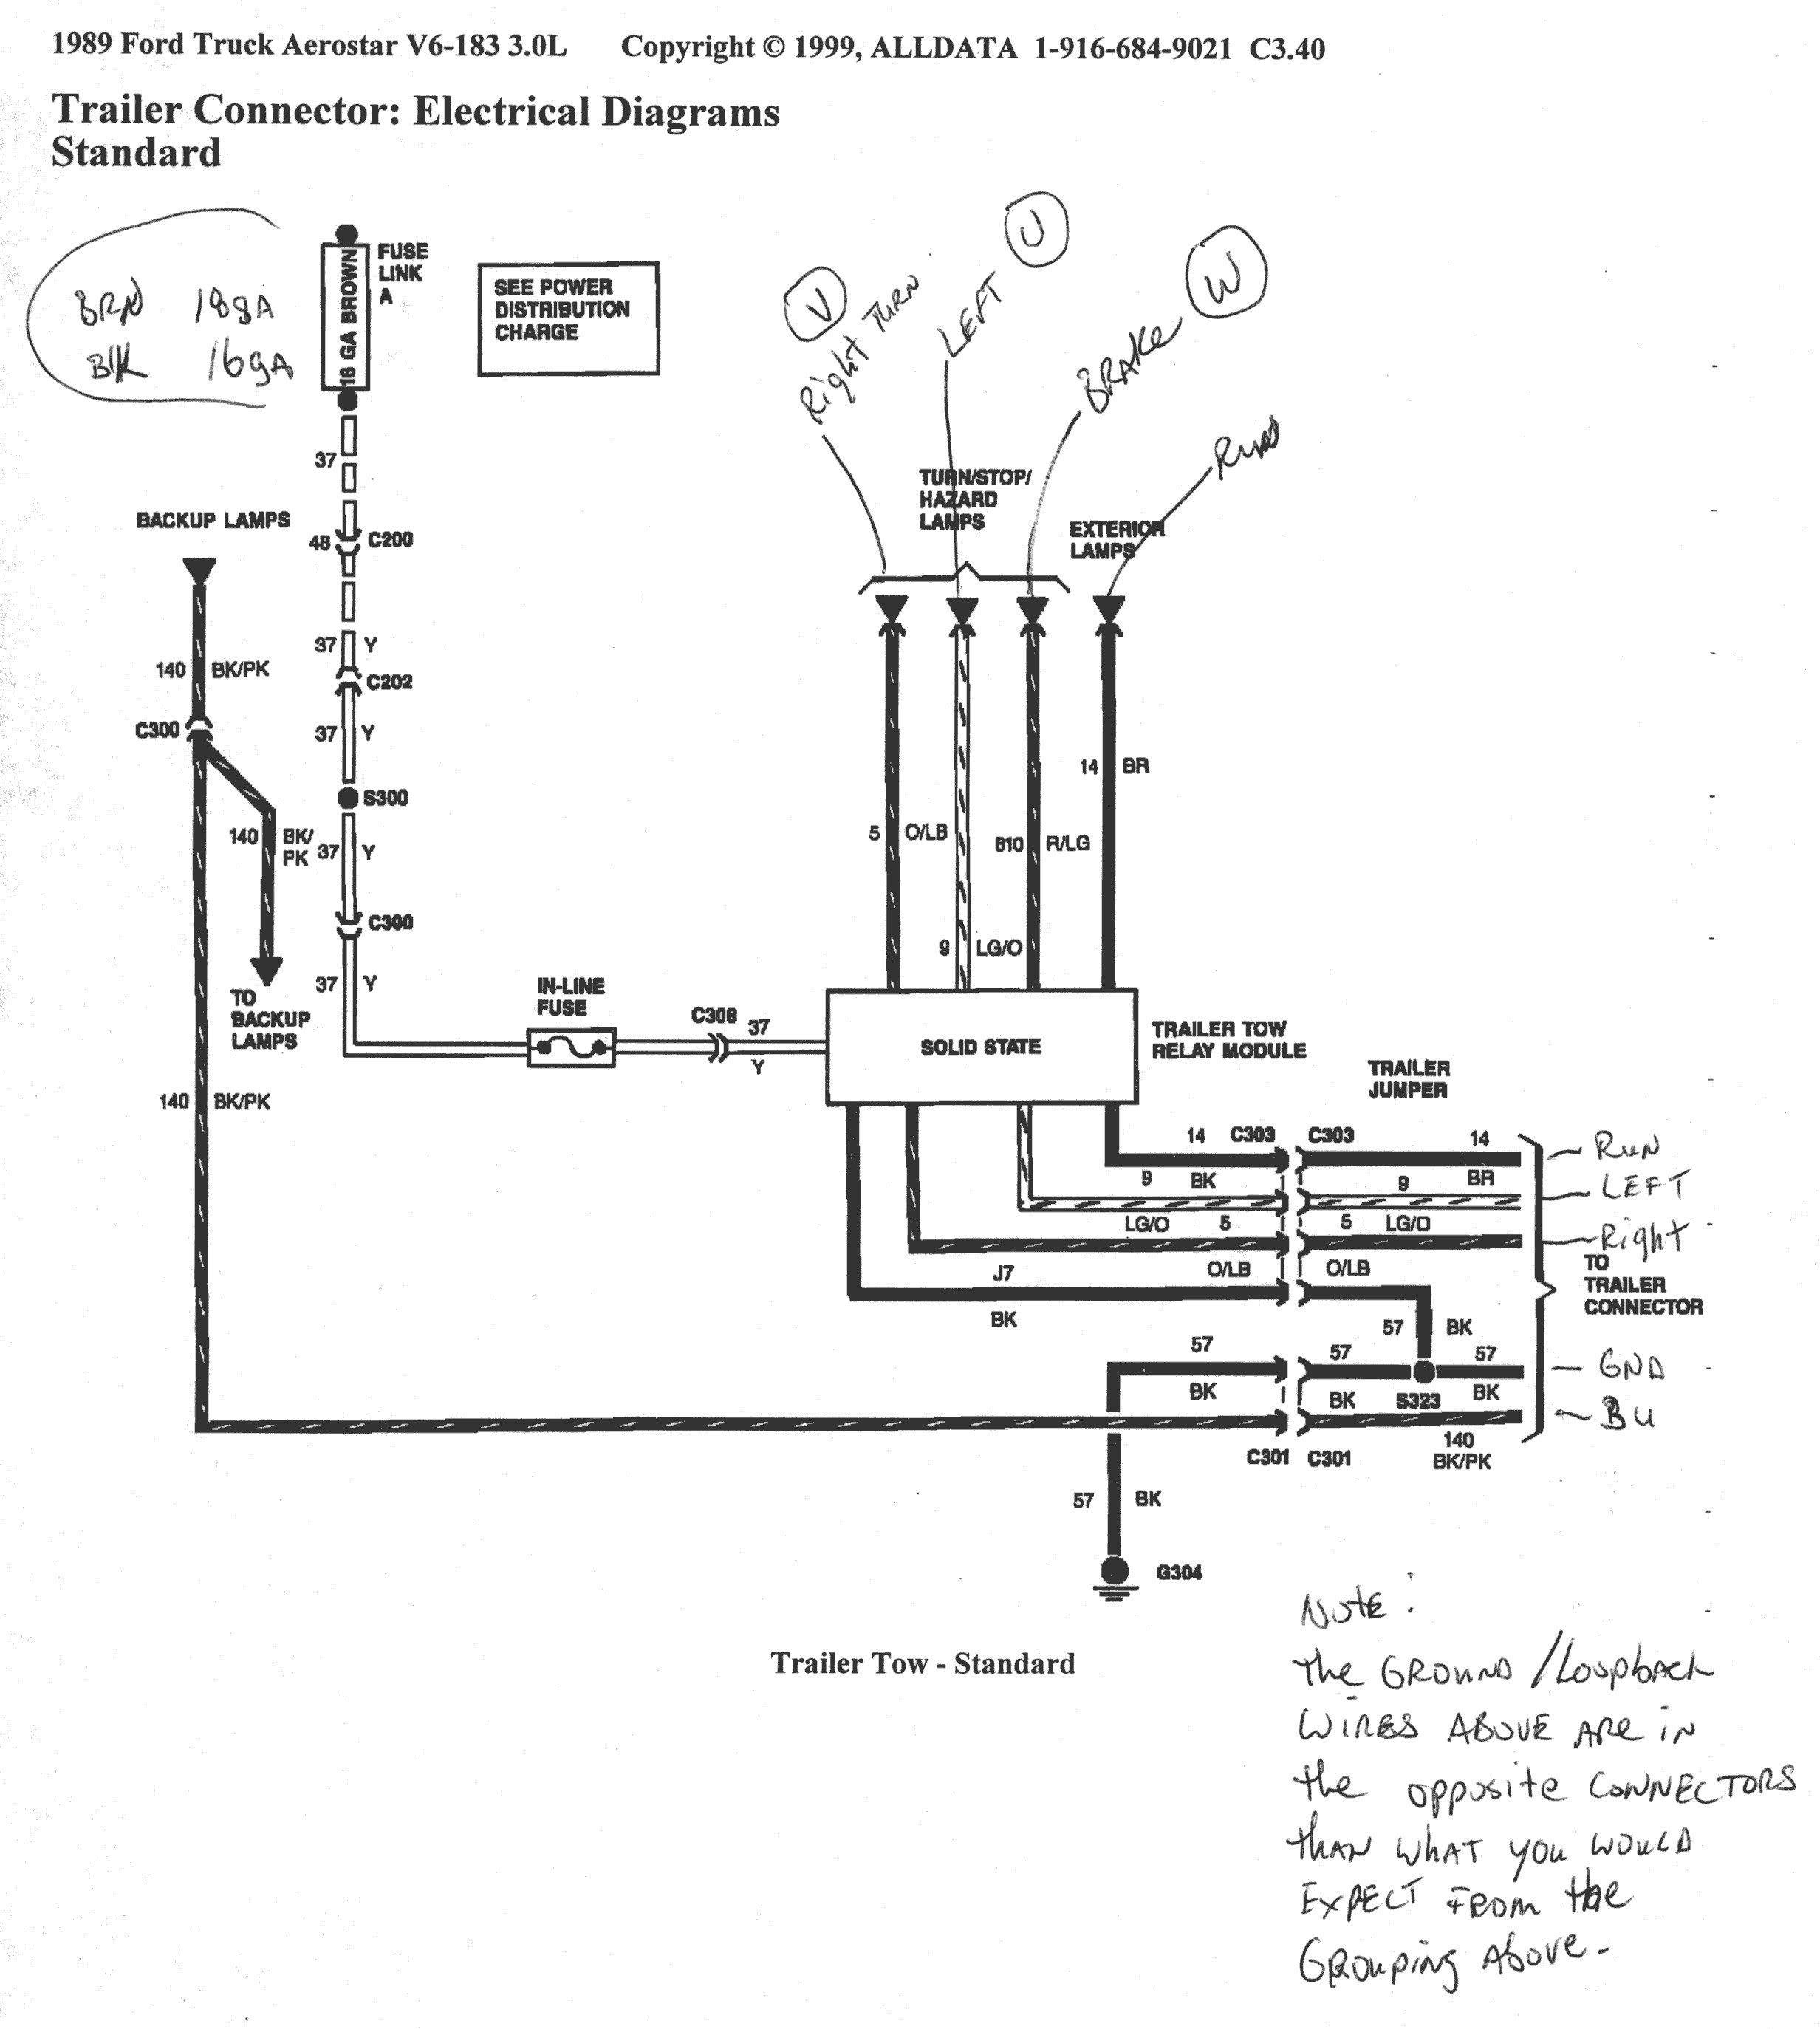 Trailer Connector Wiring Diagram Save 7 Pin Trailer Connector Plug Wiring Utility with ford F250 Diagram